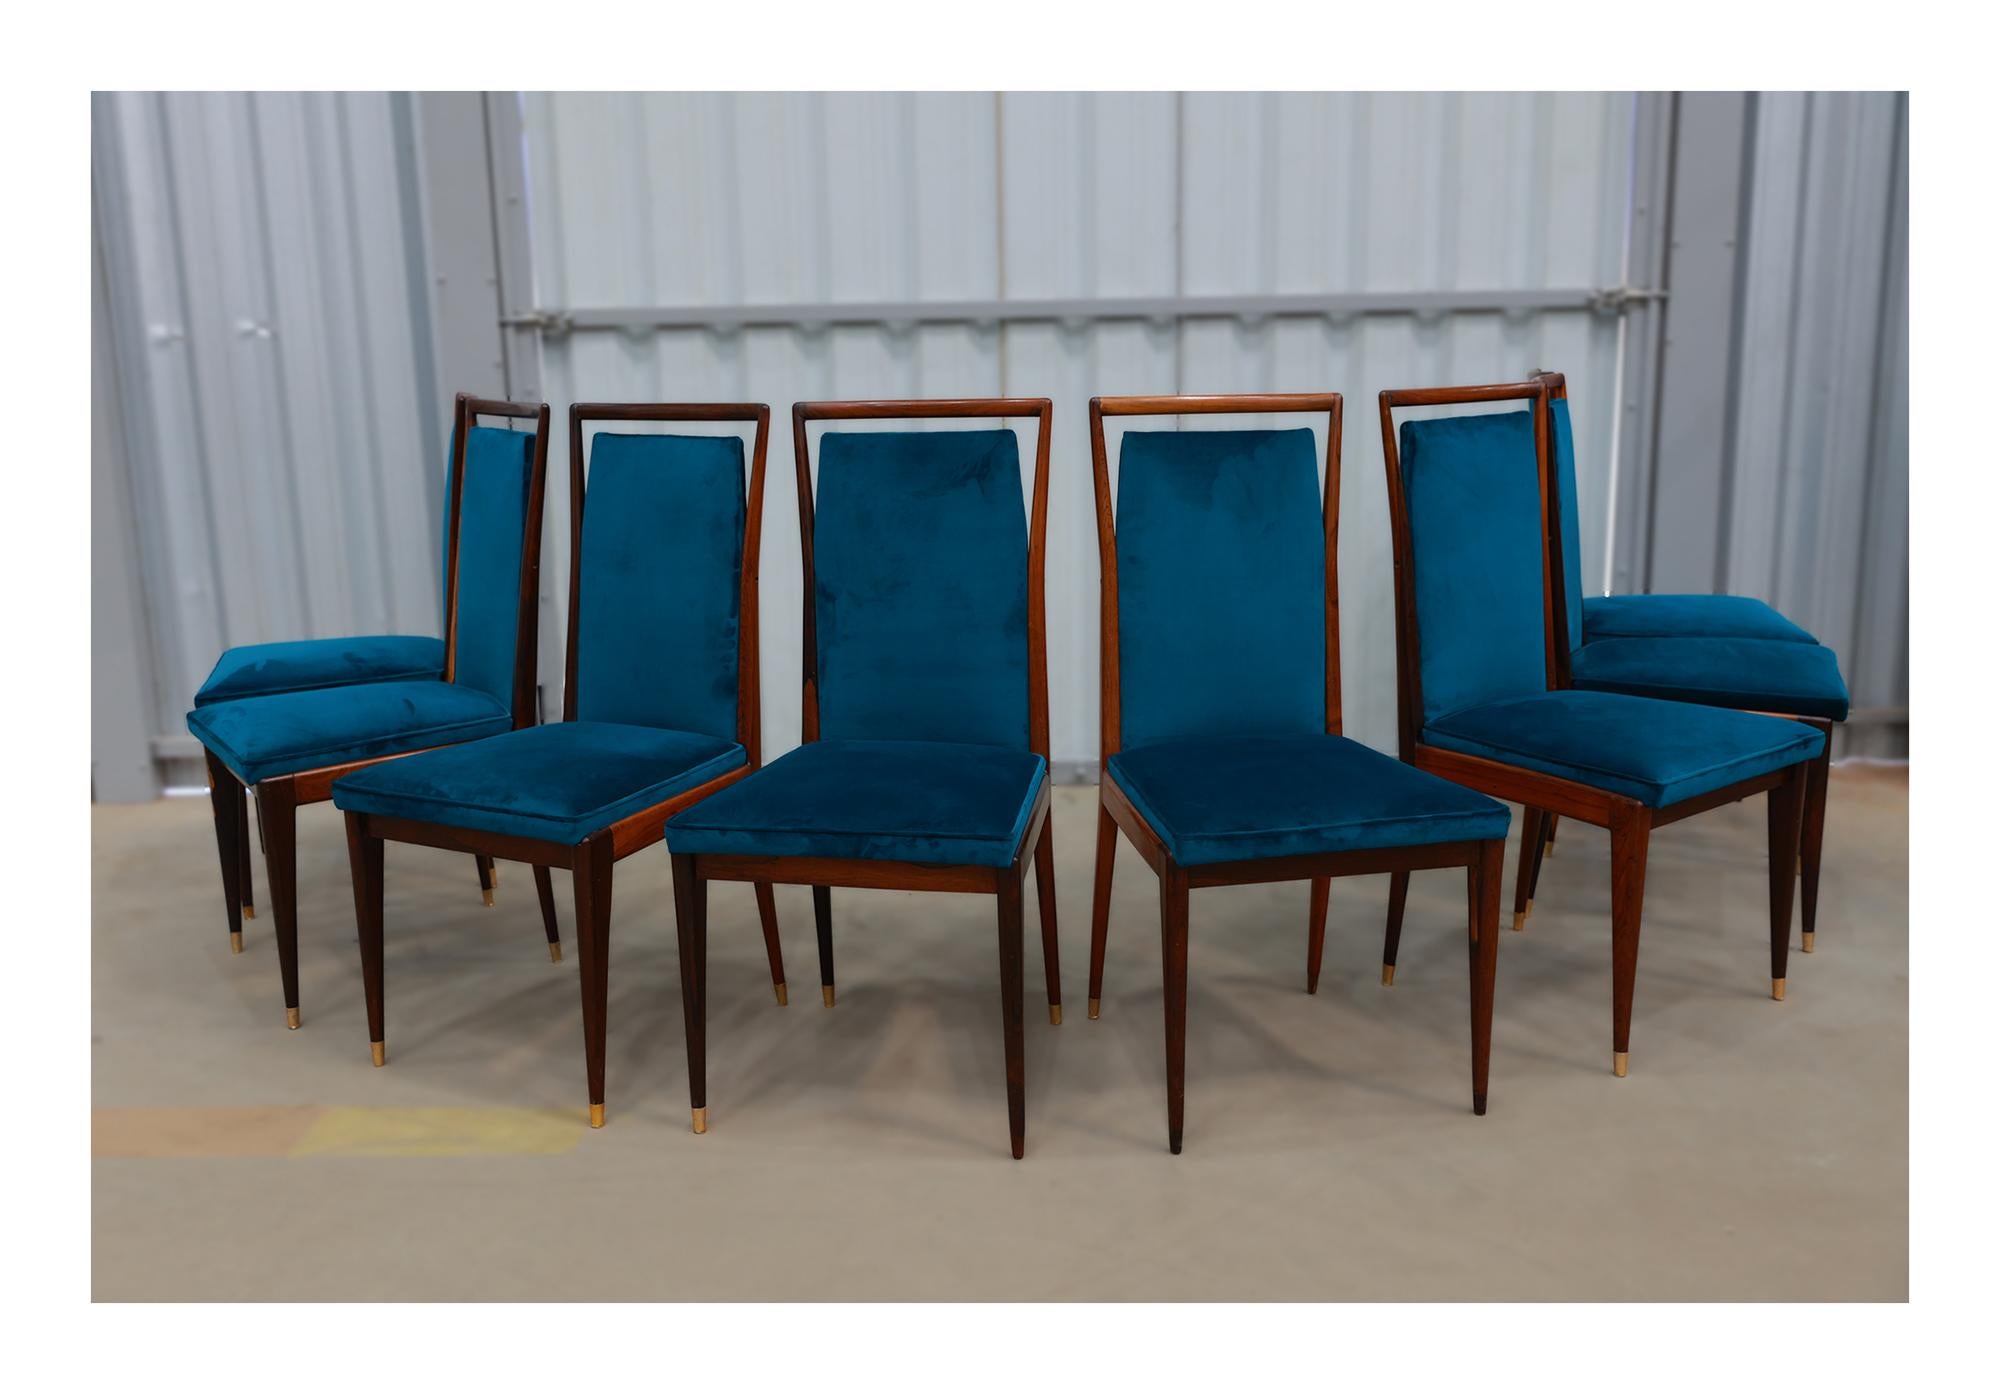 Available today, this Brazilian Modern 8 Chair Set in Hardwood & Fabric, Giuseppe Scapinelli is fantastic!

This sculptural and elegant set of 8 dining chairs features a tall backrest and tapered legs with a brass cap. Both the back and seat rest